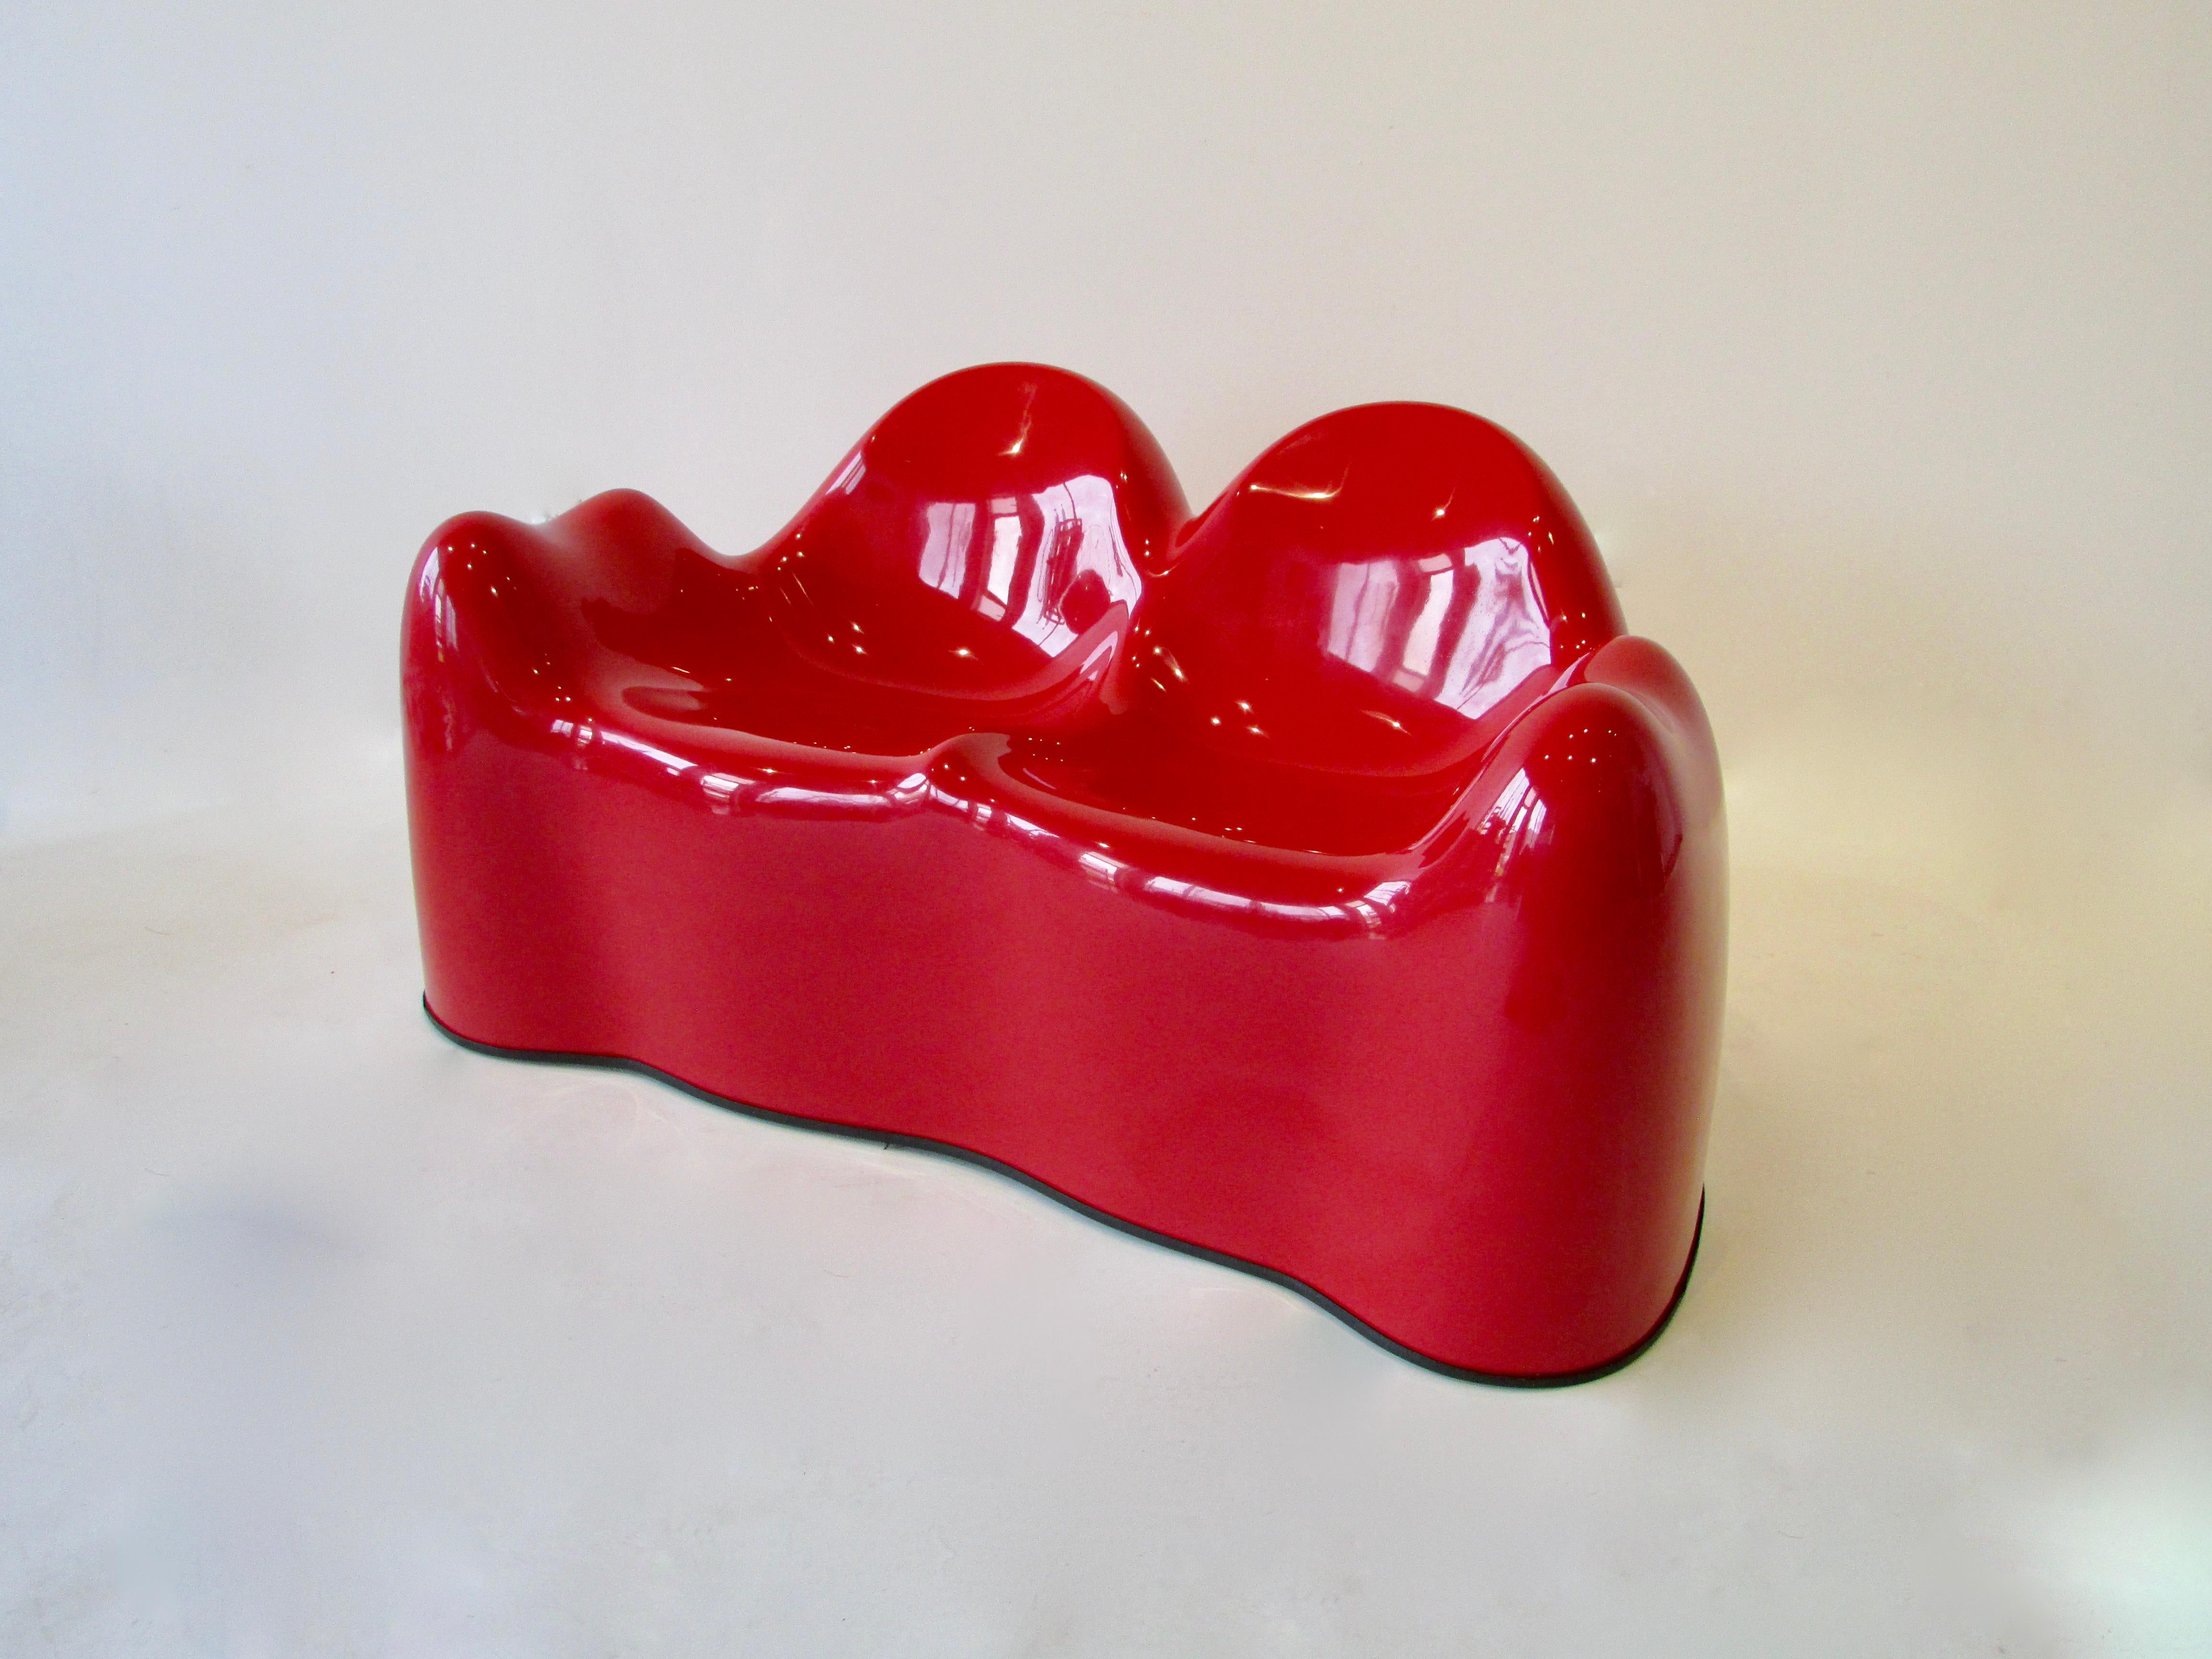 Whimsical organic form molded of fiberglass in a stylized form of molars. Designed by Wendell Castle produced by Beylerian .